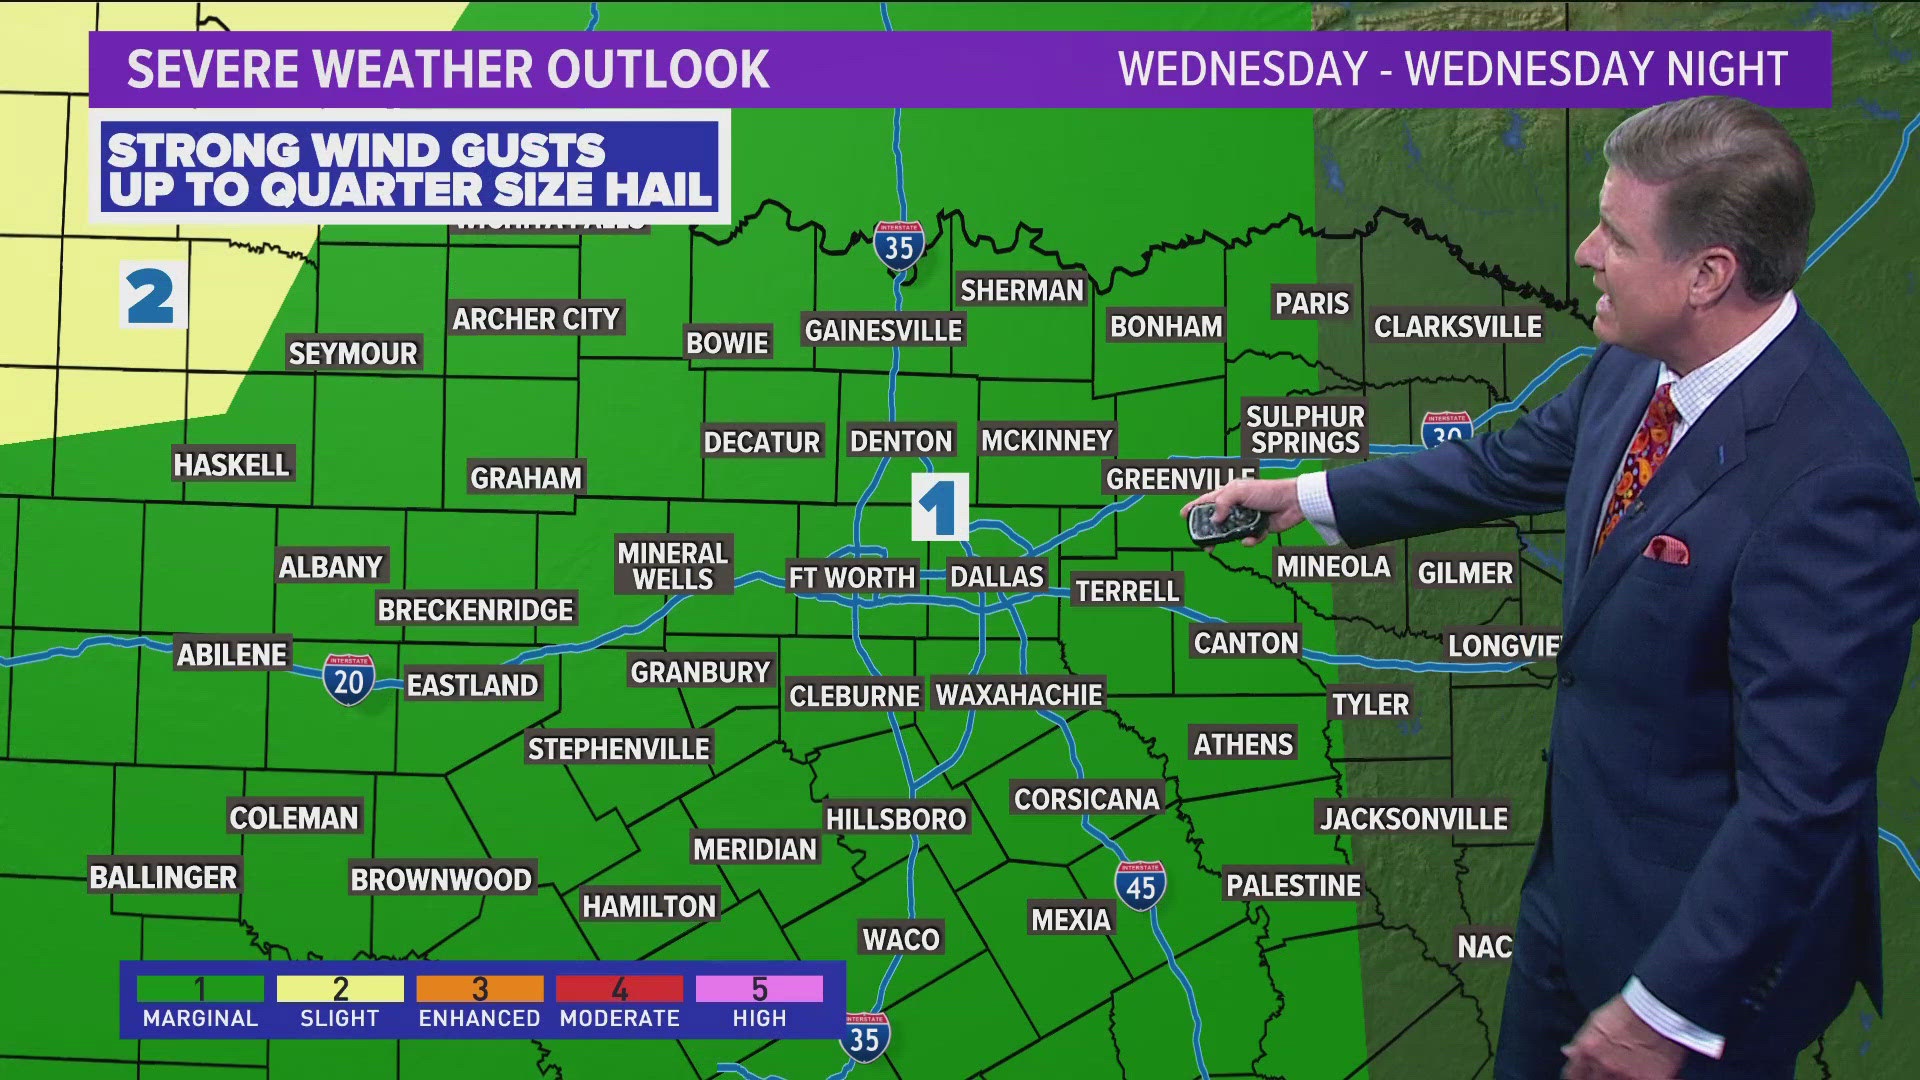 Some hail is possible Wednesday night across North Texas.